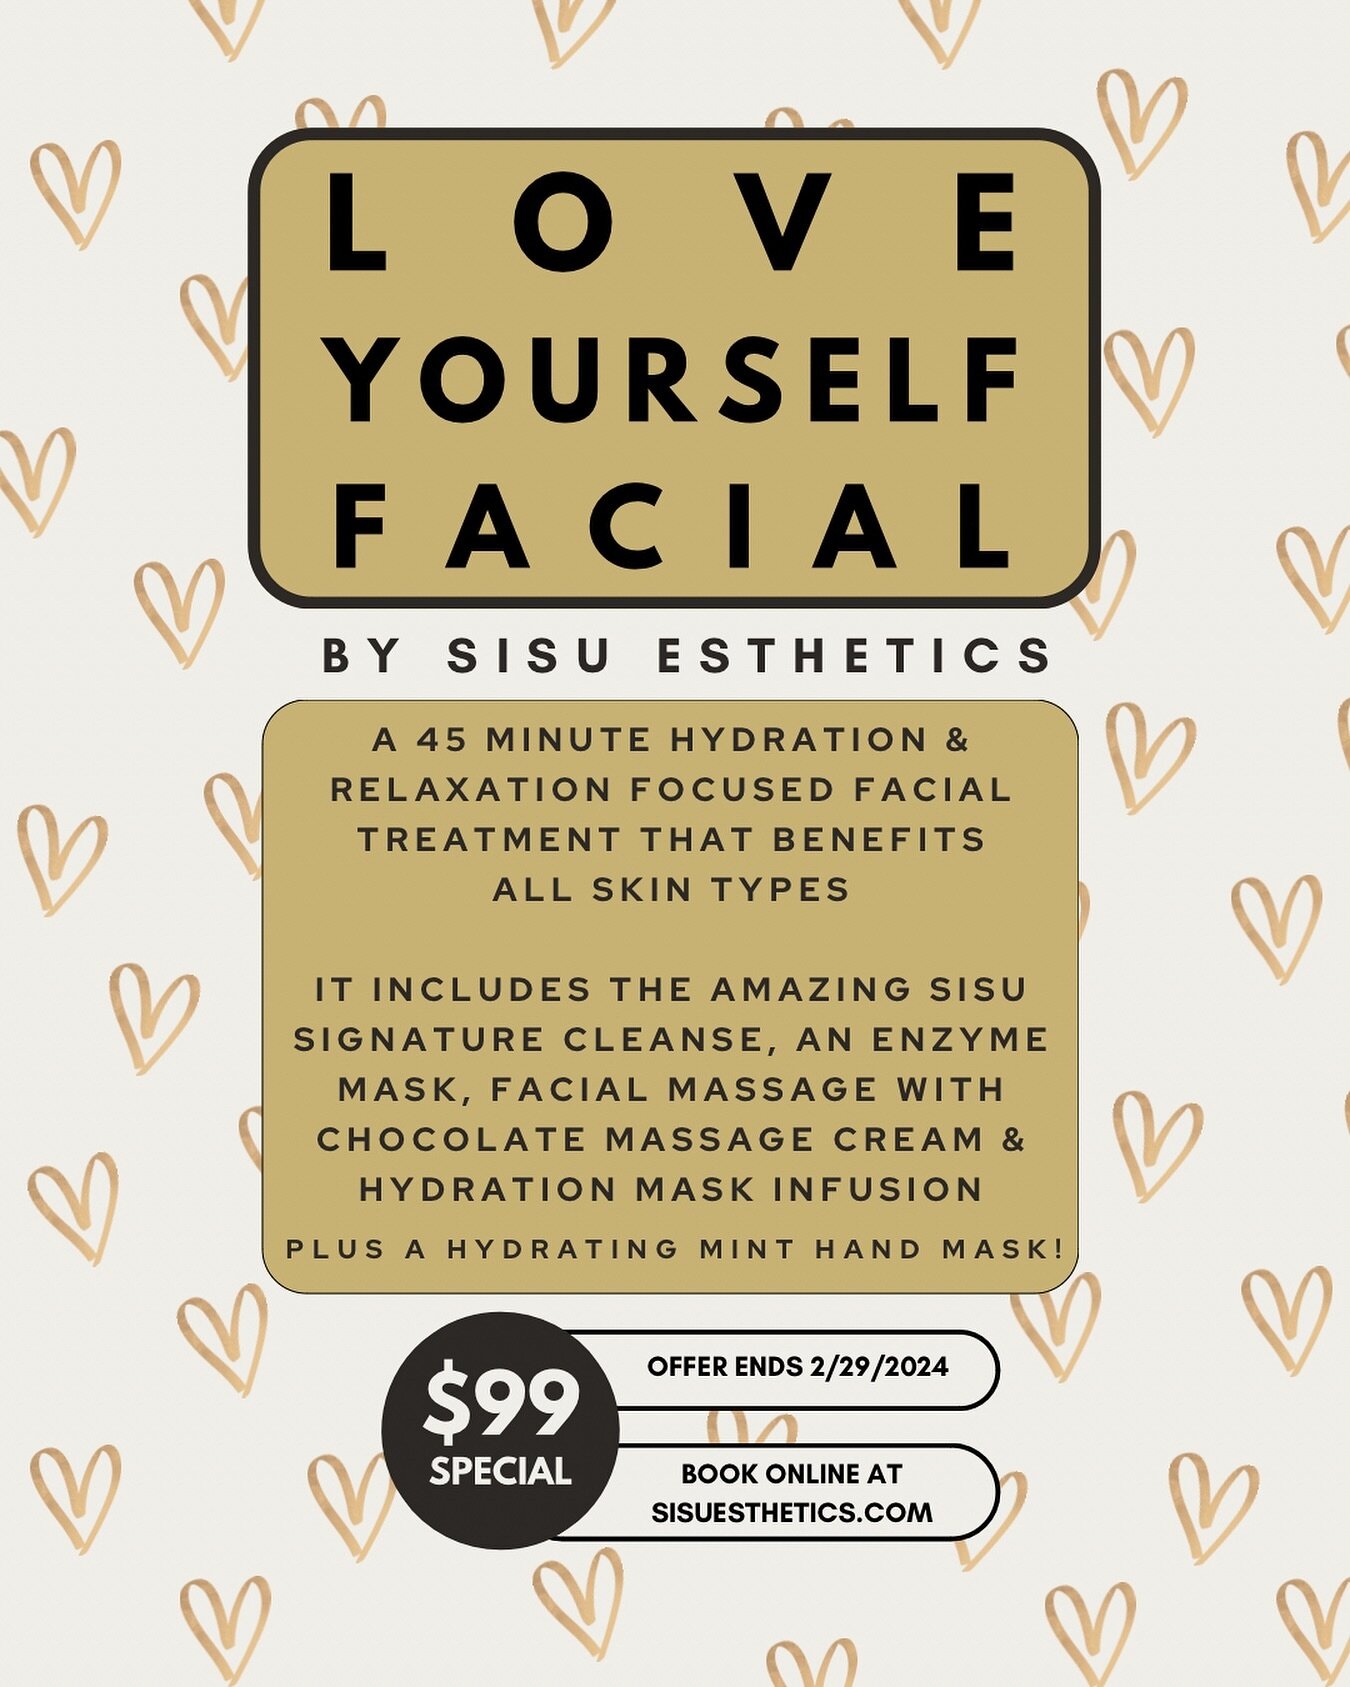 introducing the LOVE YOURSELF FACIAL by Sisu Esthetics

this magical facial serves as a reminder to slow down and show yourself the same love and care that you so freely show to others

to schedule your appointment, click &ldquo;book now&rdquo; on my